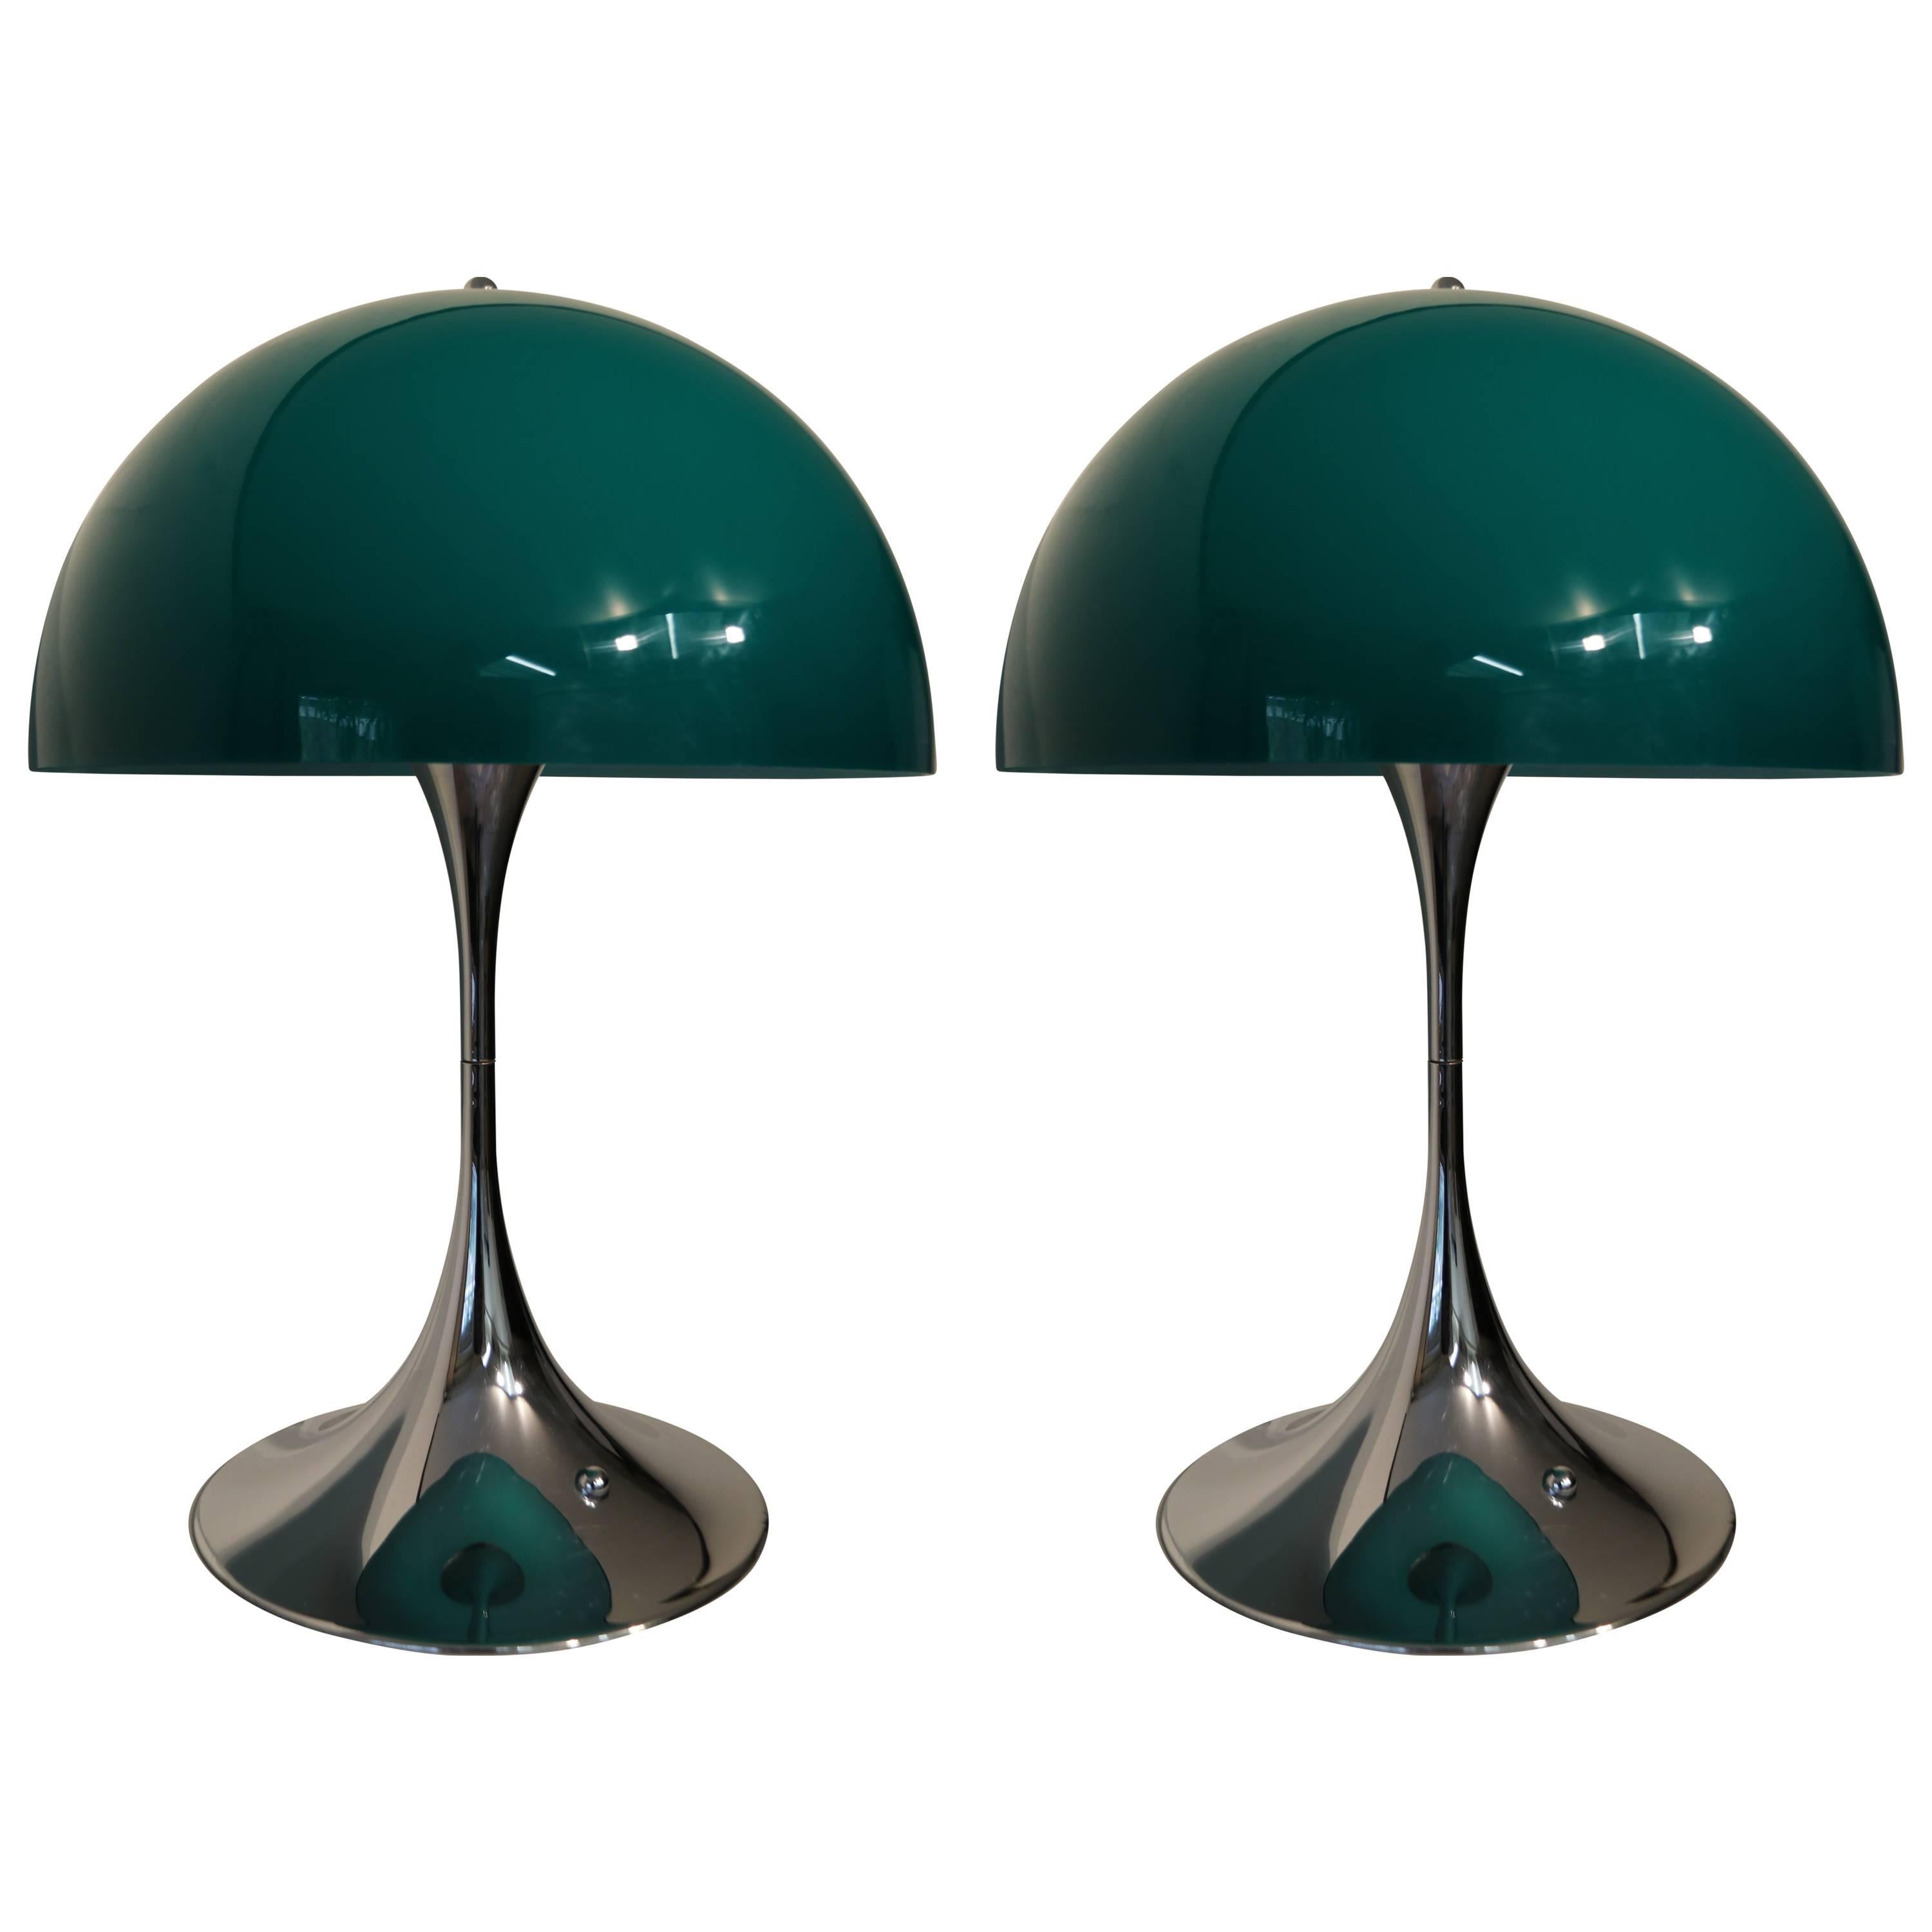 Verner Panton "Panthella" First Edition in Green and Chrome, 1 available